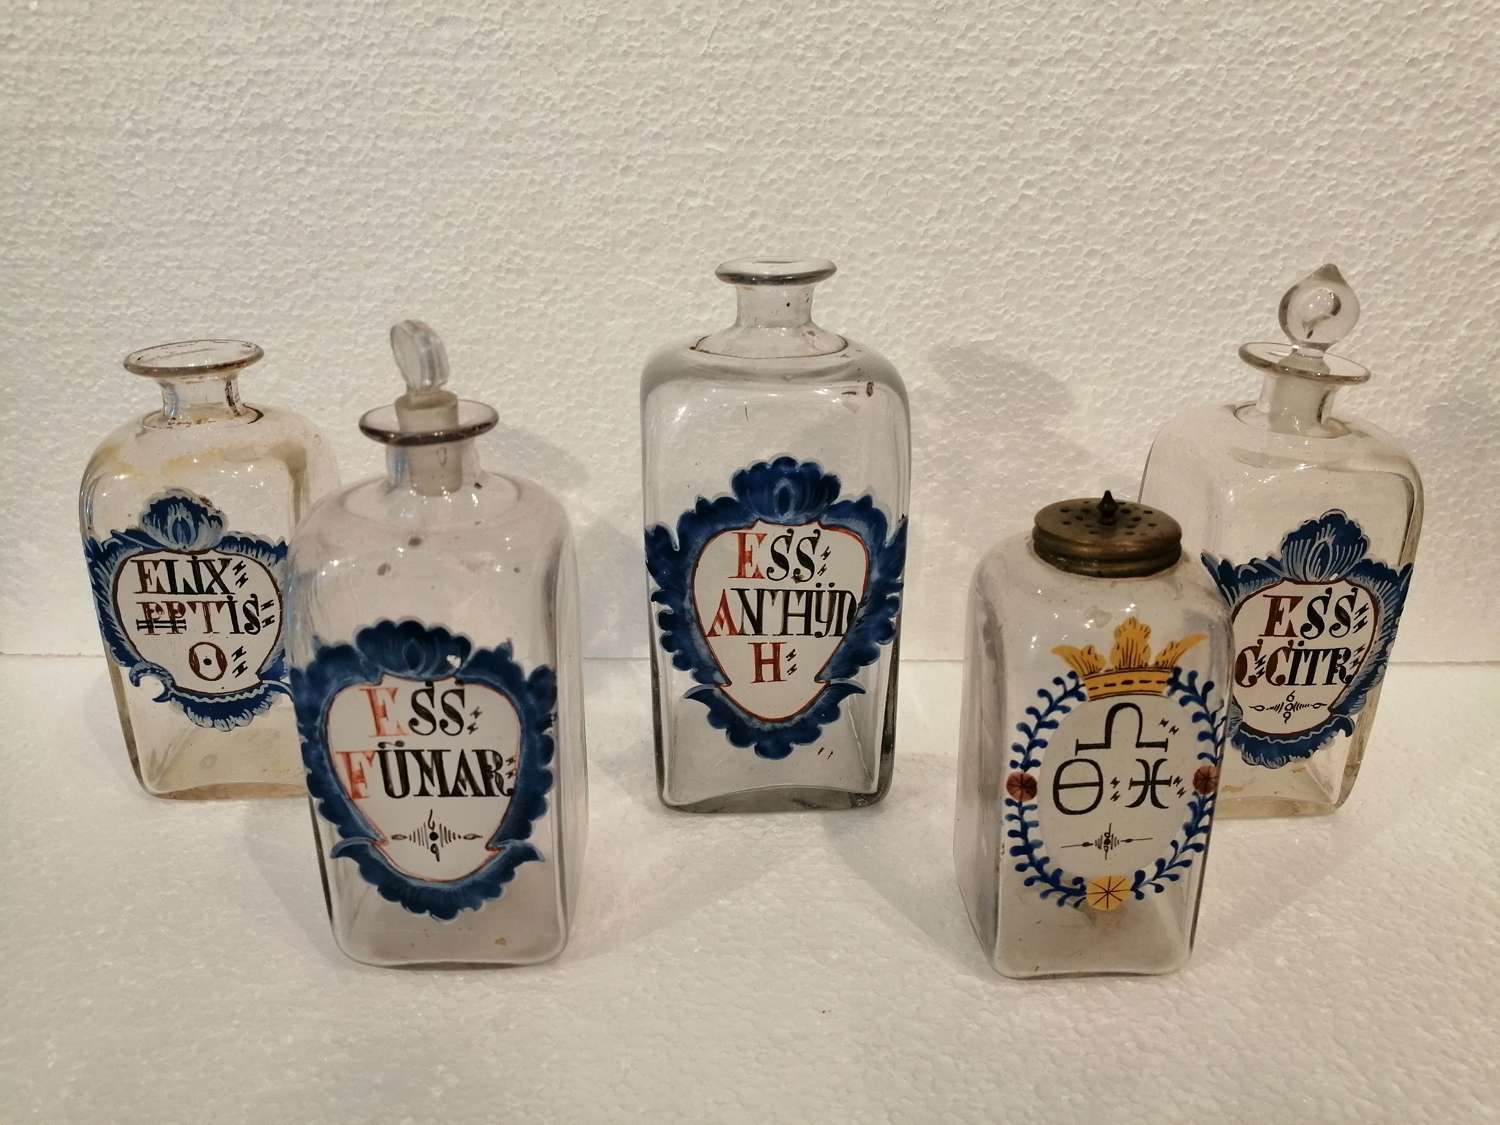 A group of 18th century apothecary bottles